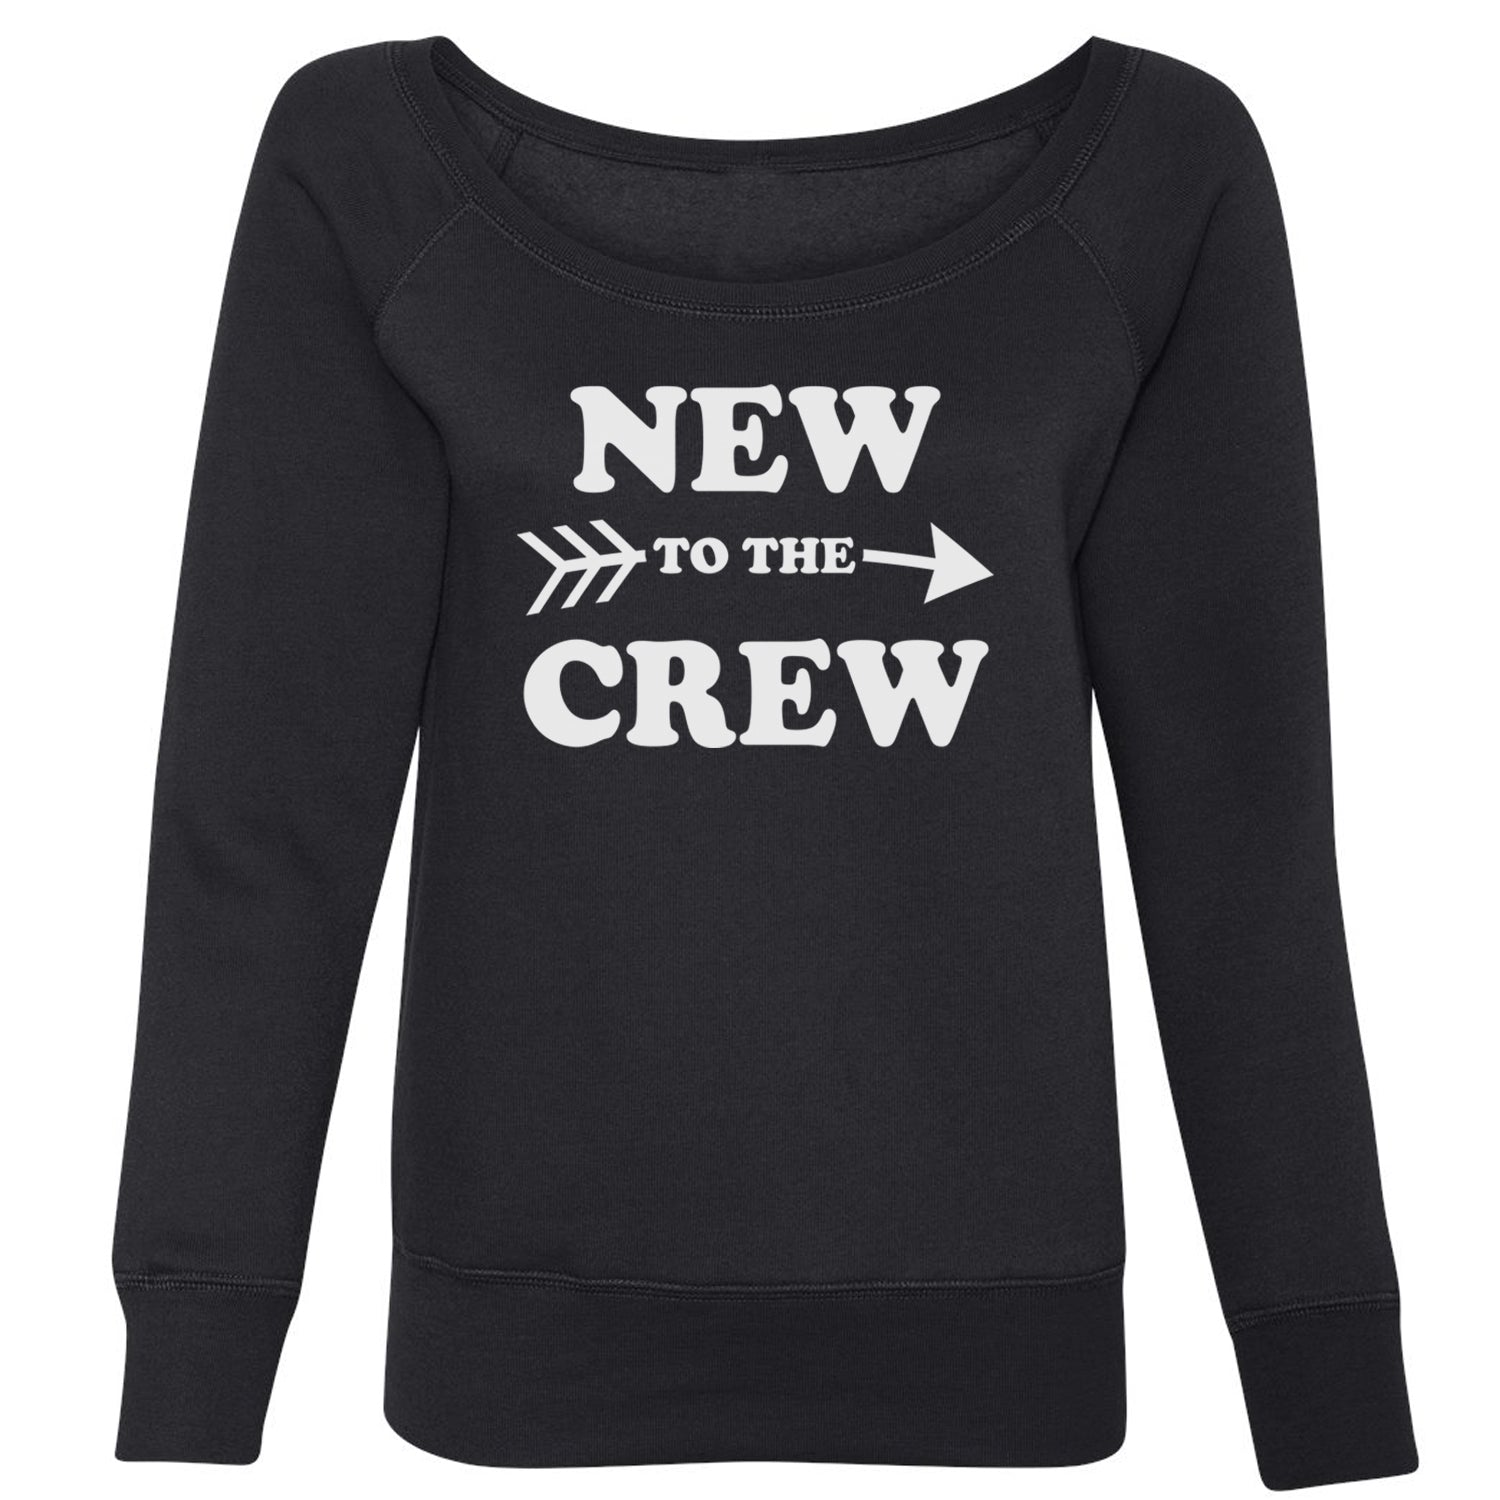 New To The Crew Slouchy Off Shoulder Oversized Sweatshirt announcement, baby, cousin, gender, newborn, reveal, toddler by Expression Tees